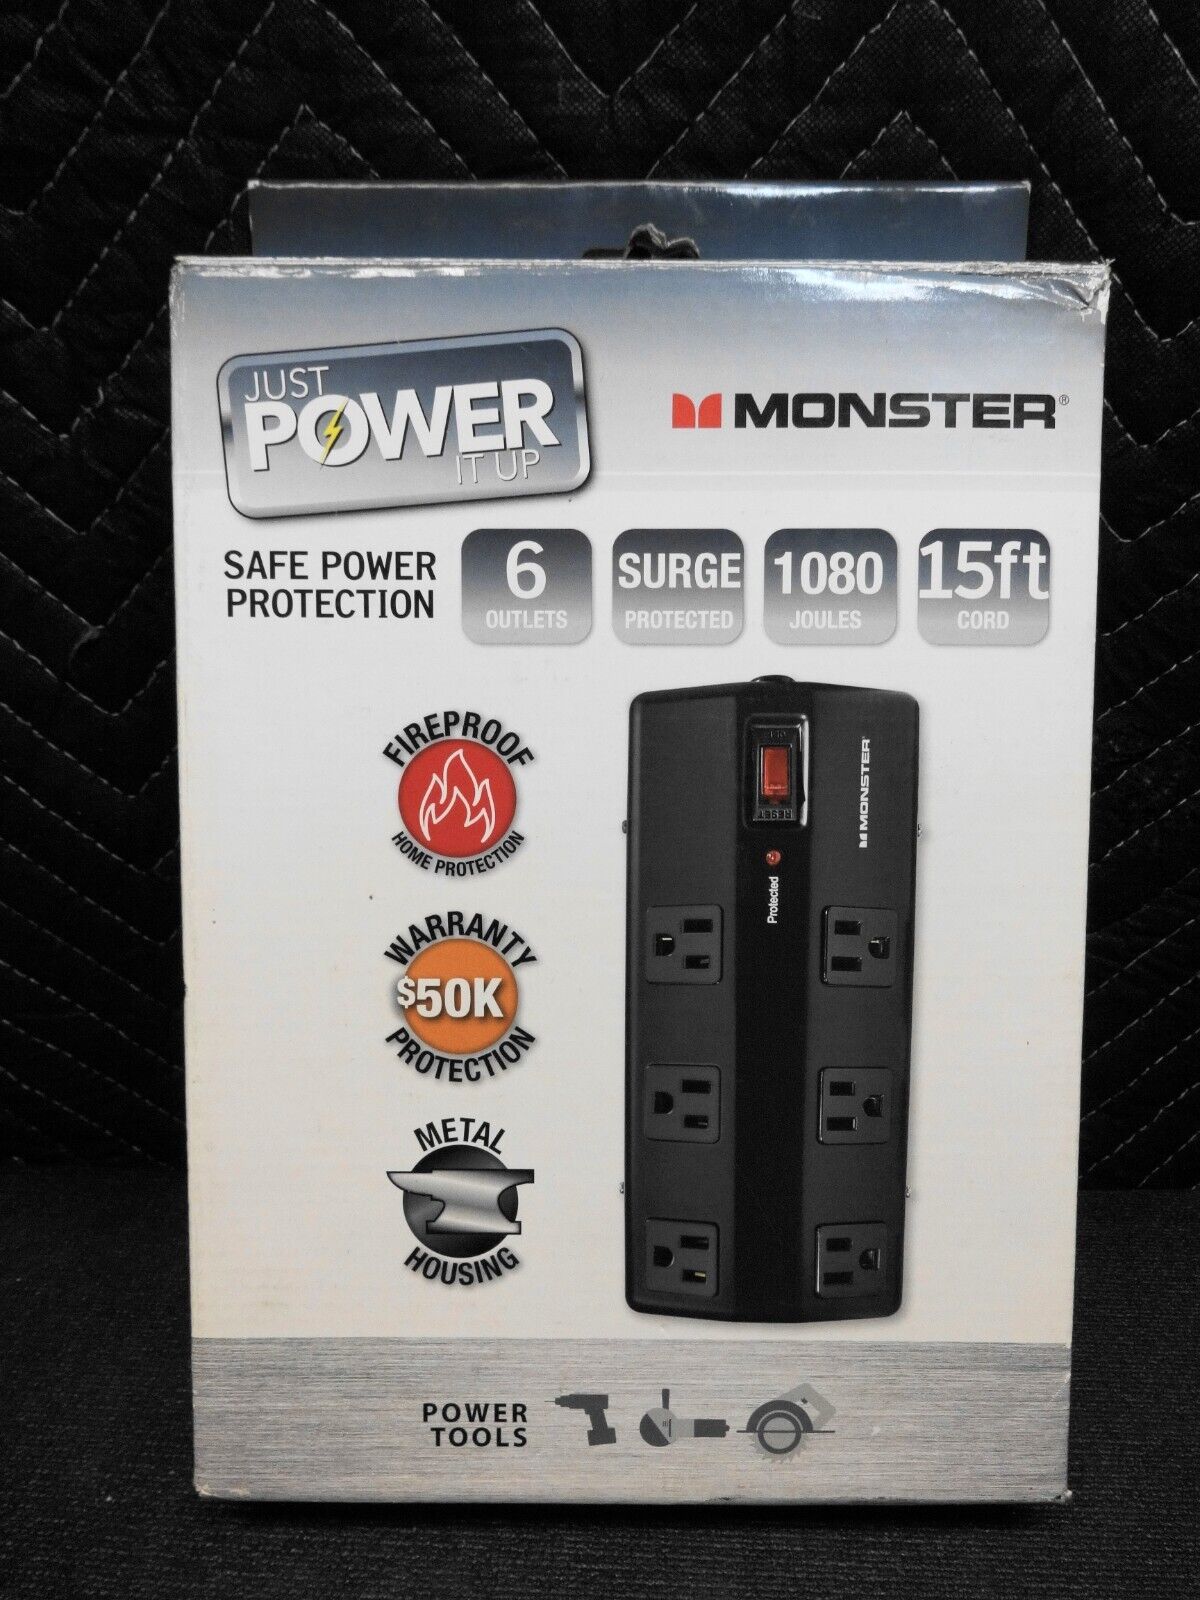 Monster 00729, 6 Outlet Safe Protection Power Surge Protector